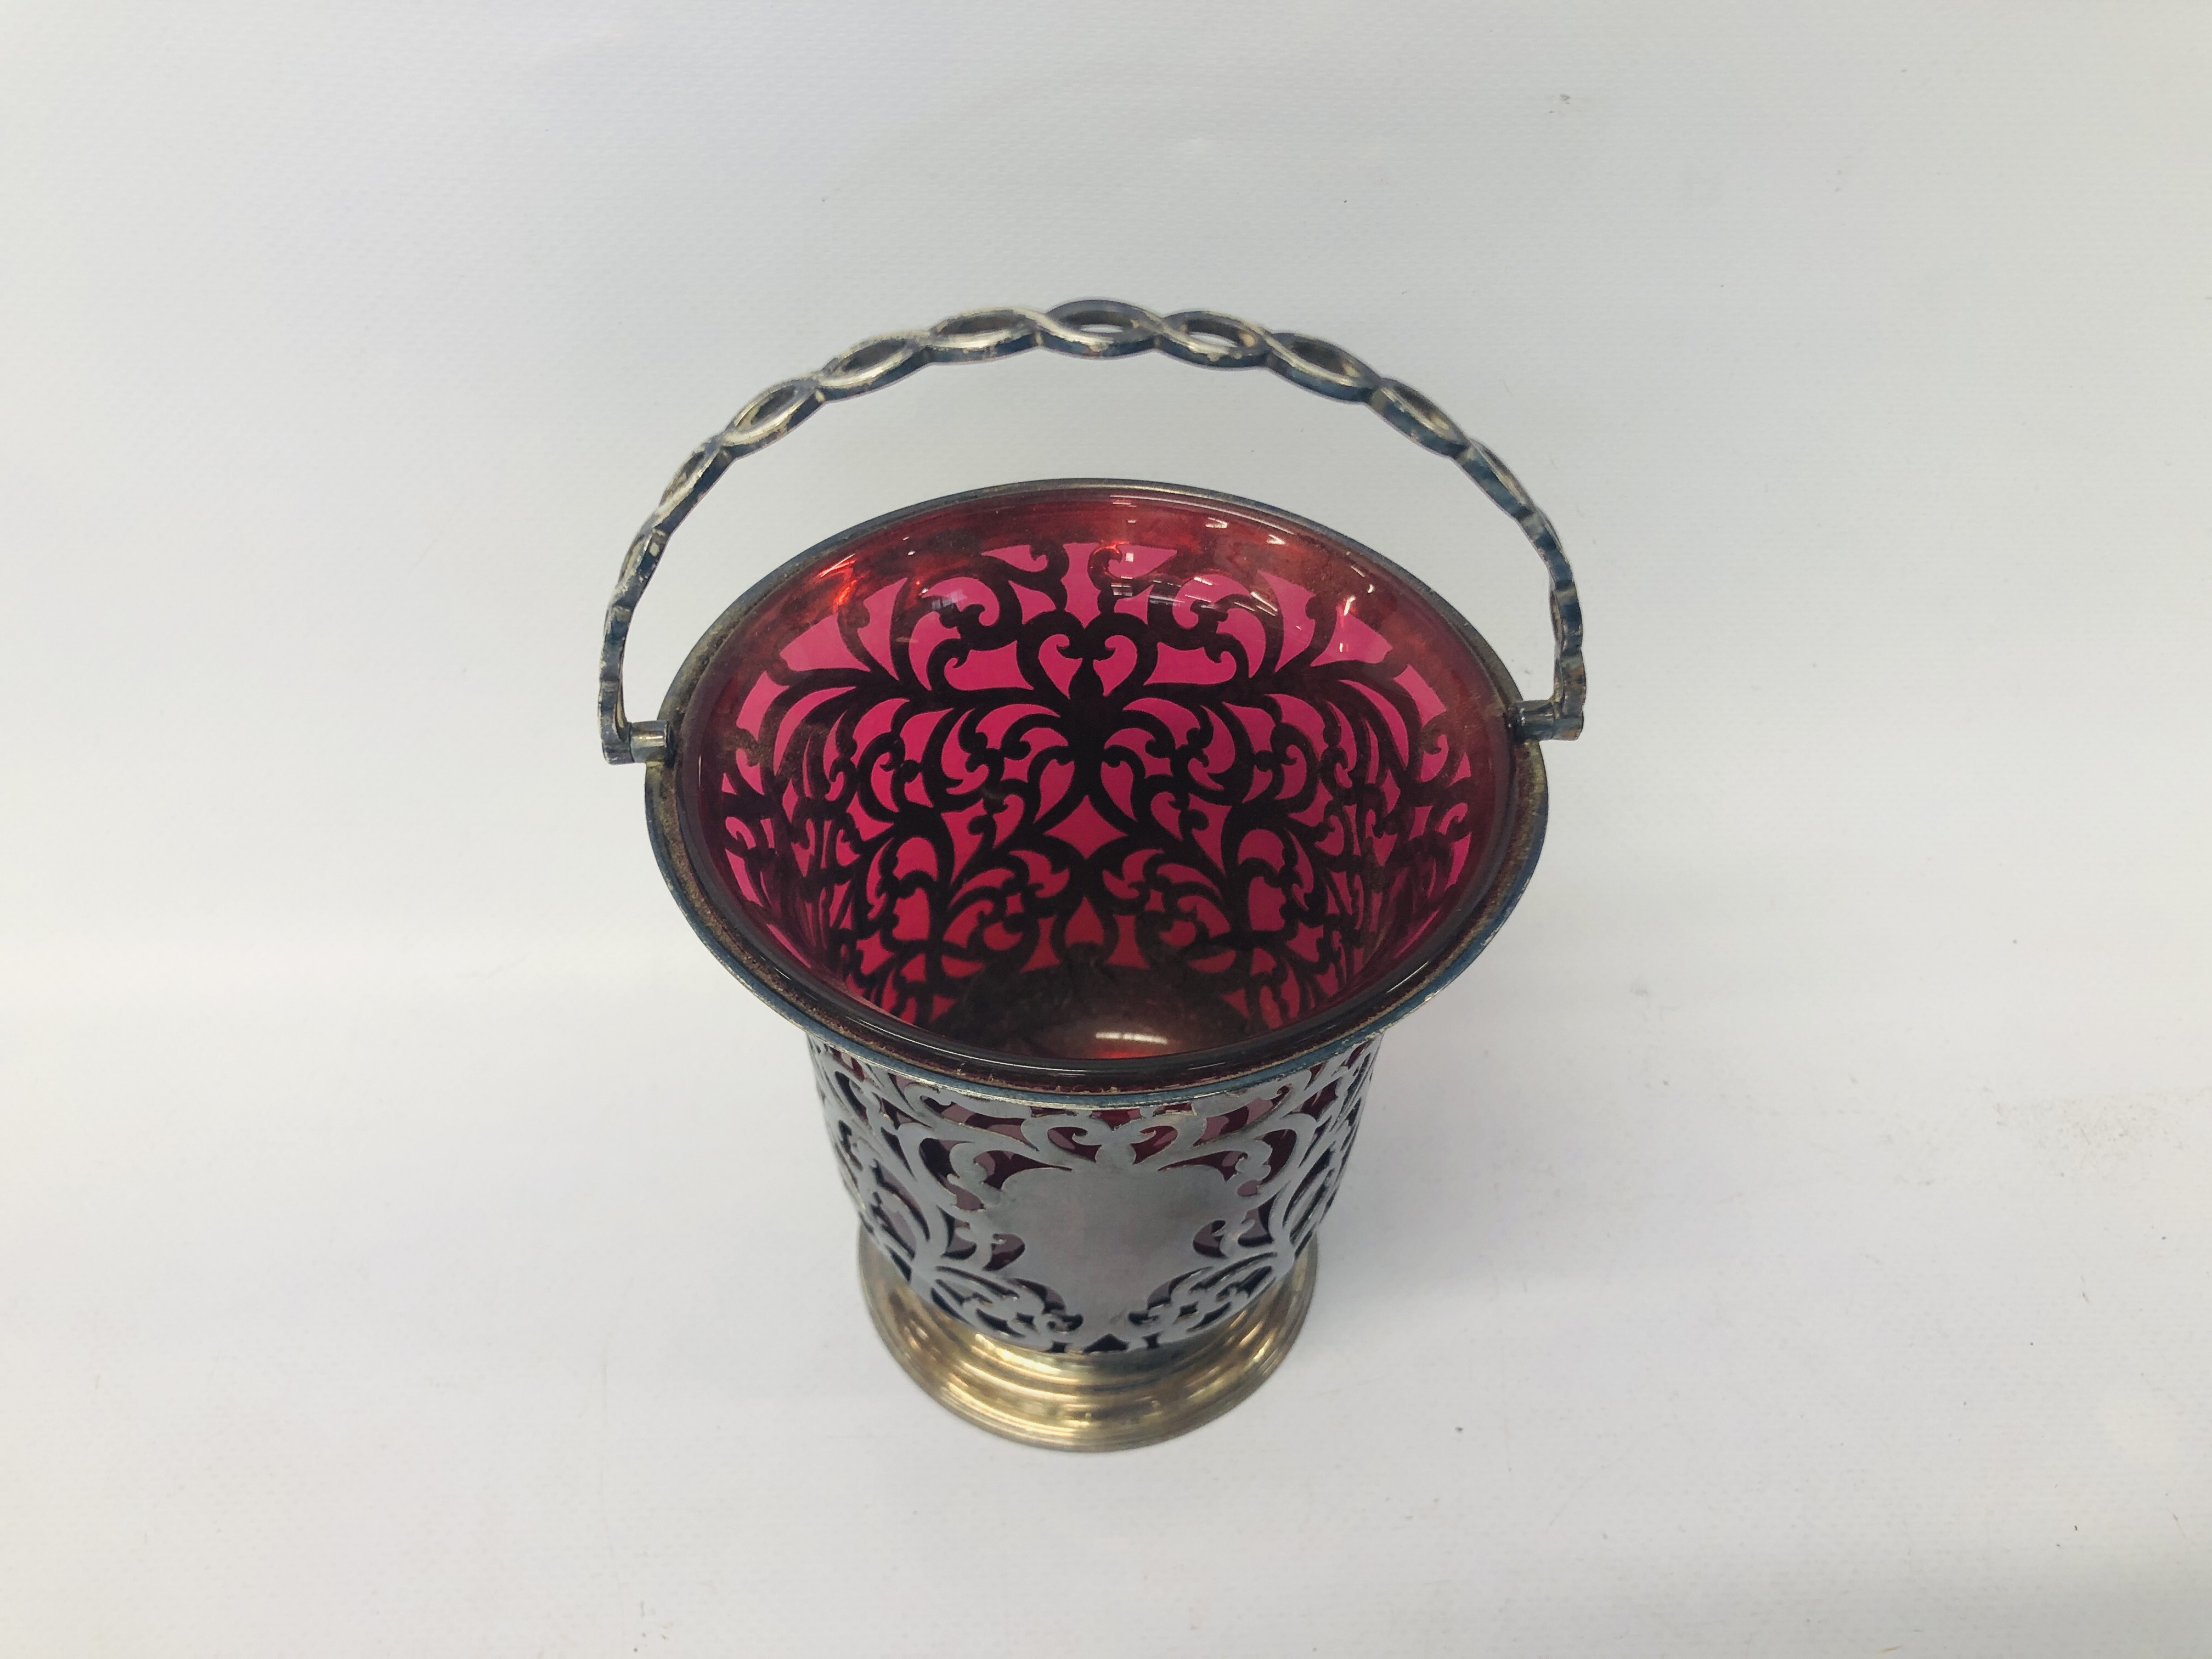 PERIOD SILVER OPEN WORK BASKET WITH CRANBERRY GLASS LINER H 11CM (NOT INCLUDING HANDLE) - Image 2 of 6